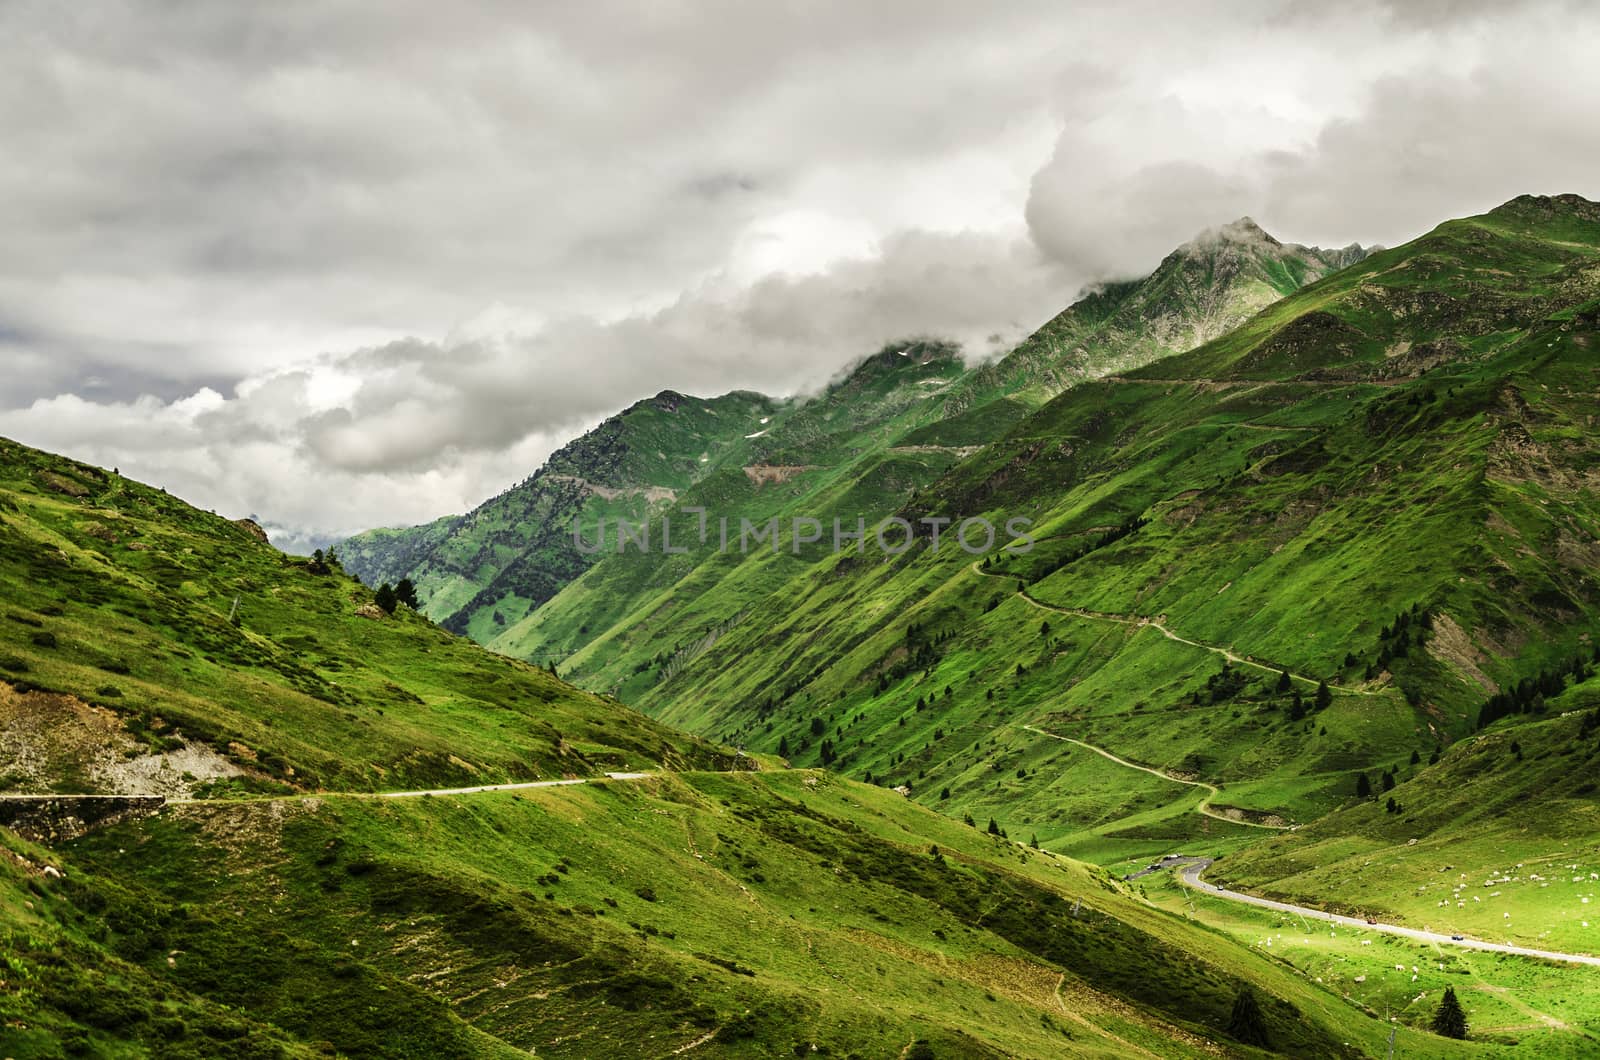 Pyrenees mountains landscape by TilyoRusev